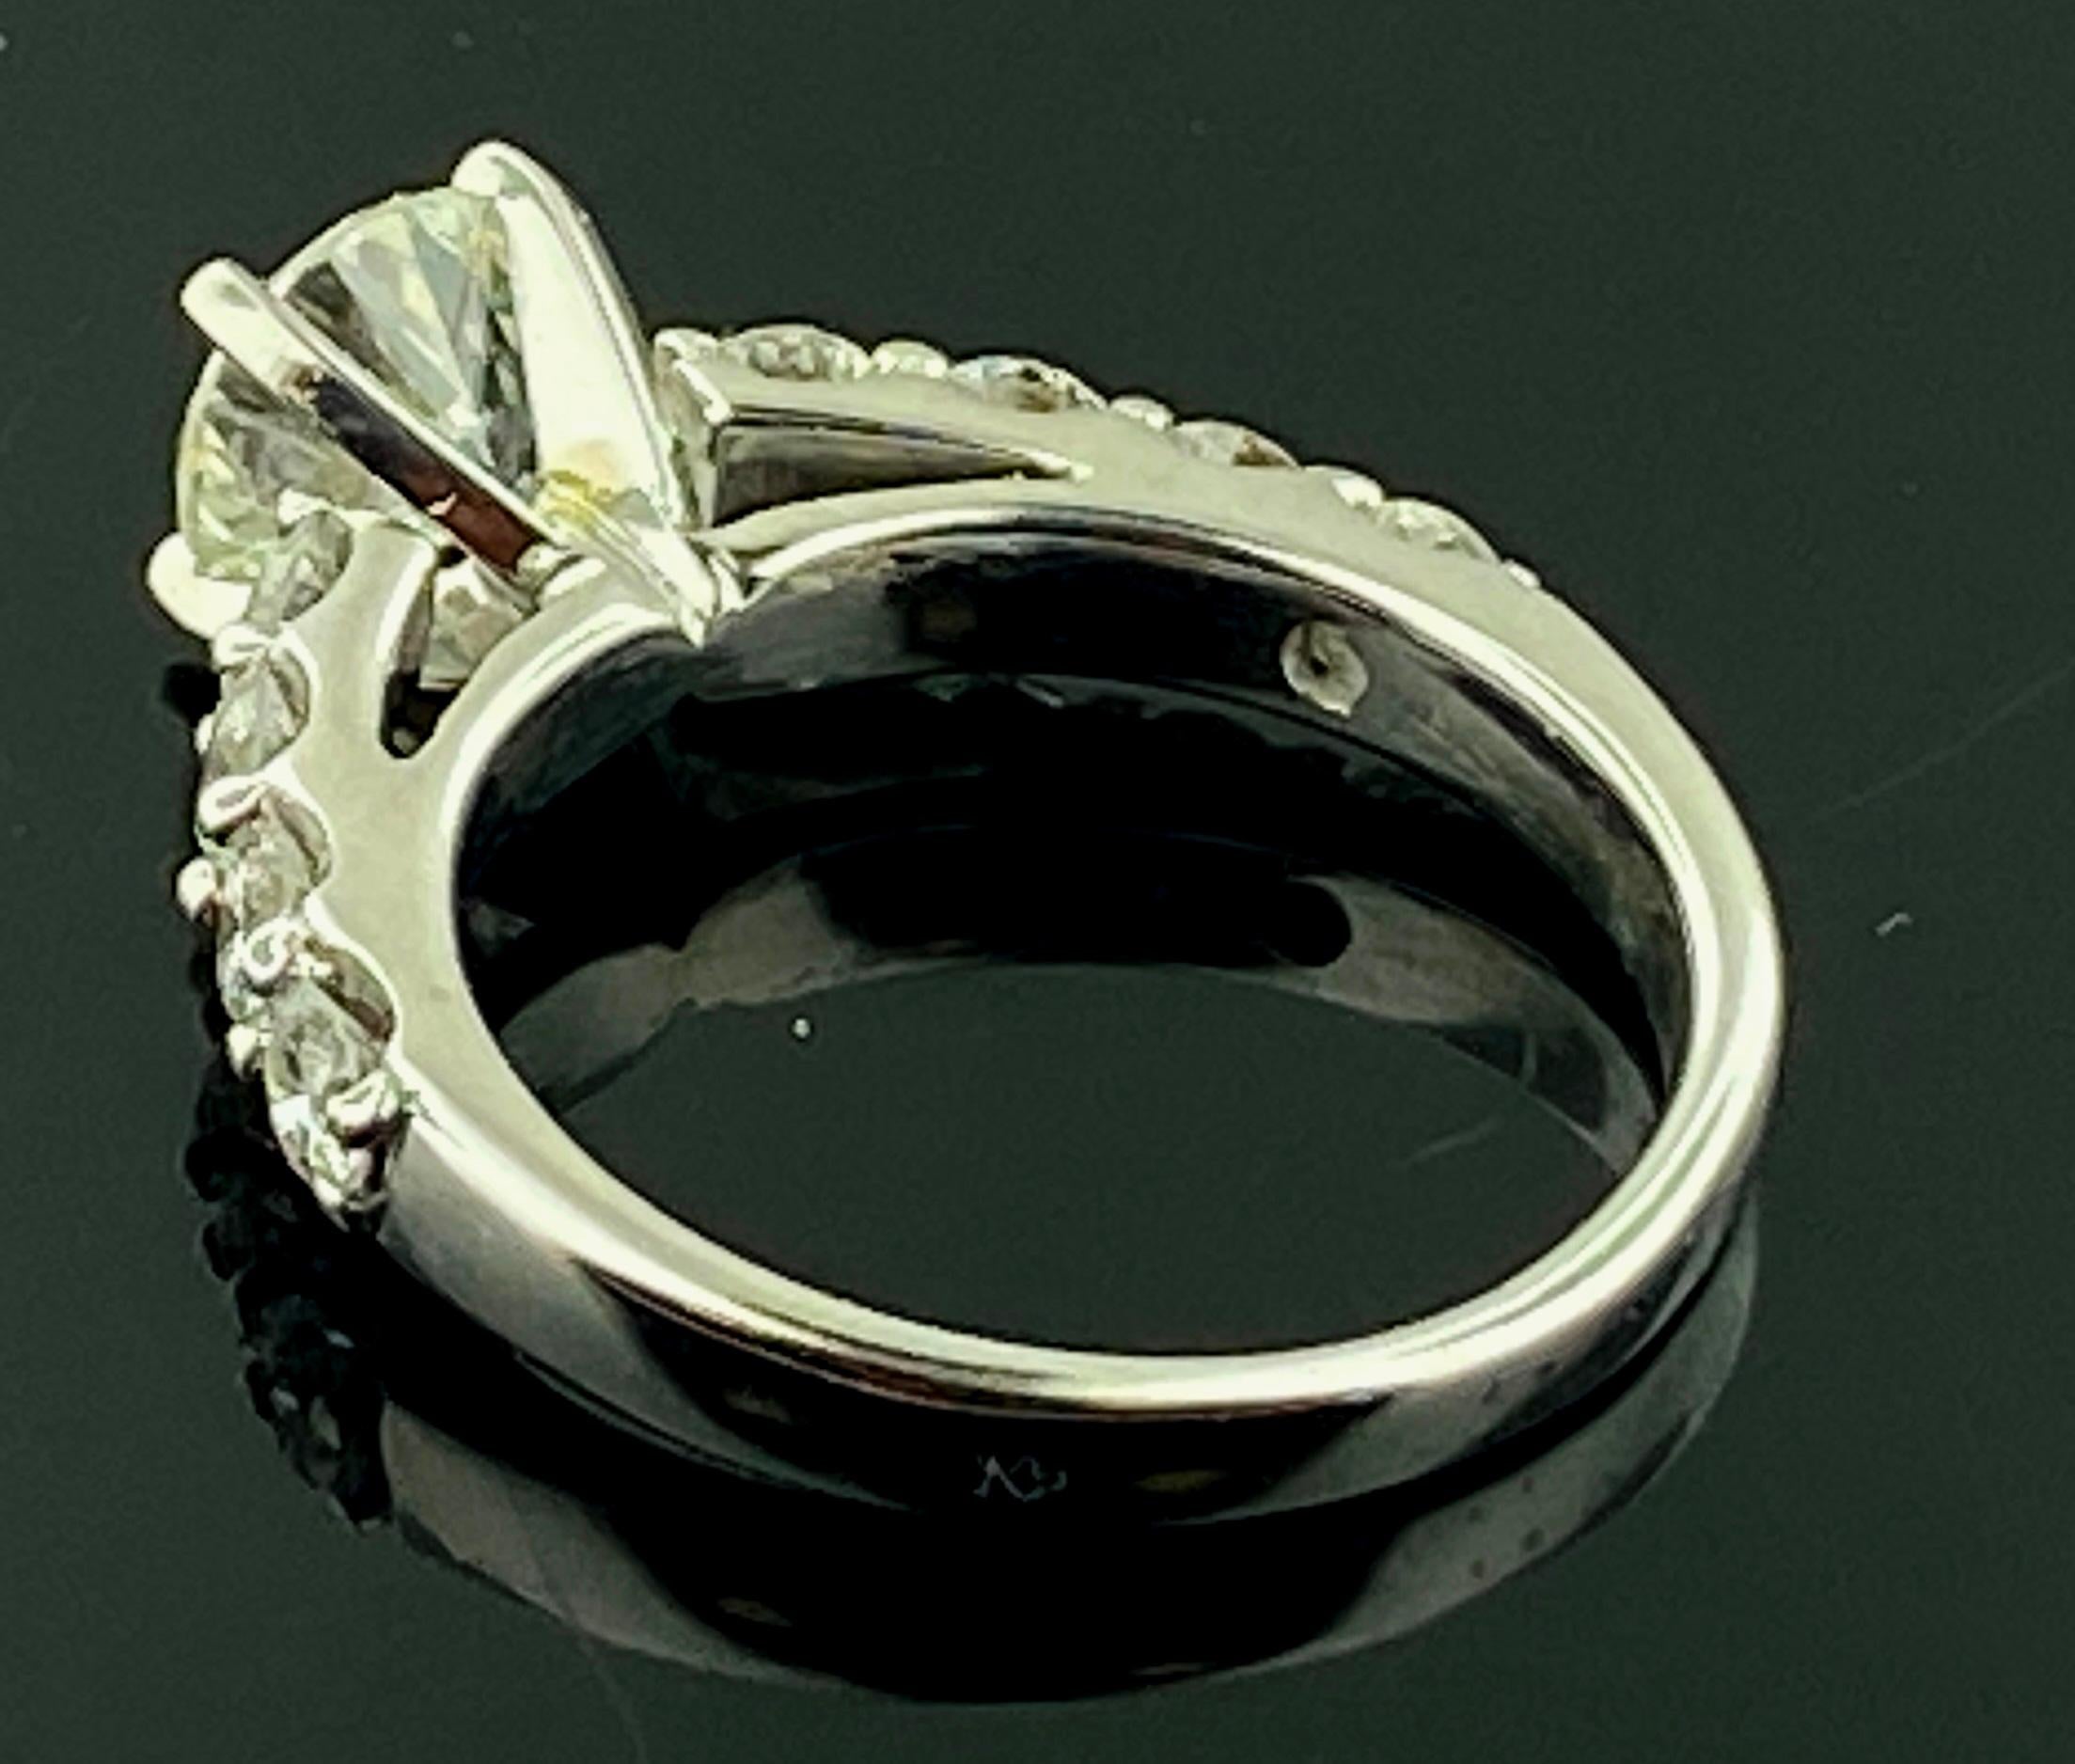 1.18 Carat Round Cut Center Diamond Engagement Ring in 14 Karat White Gold In Excellent Condition For Sale In Palm Desert, CA